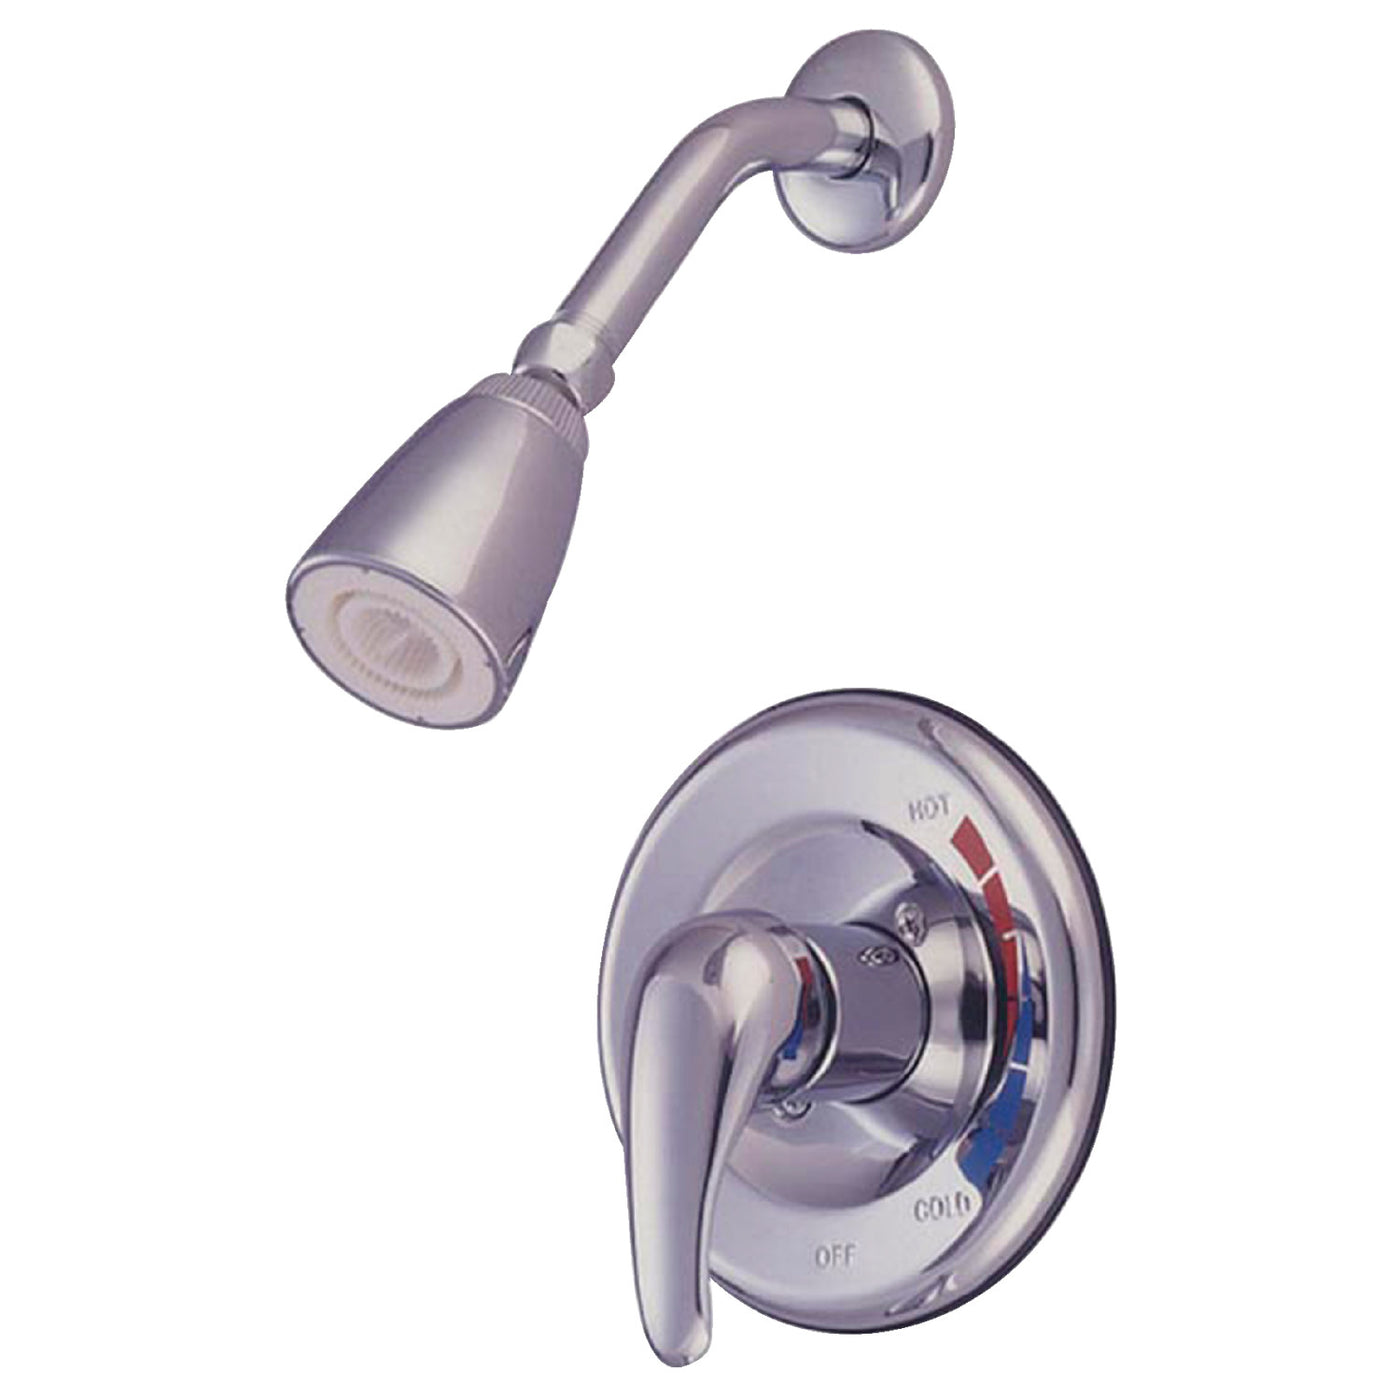 Elements of Design EB651SO Shower Faucet, Polished Chrome